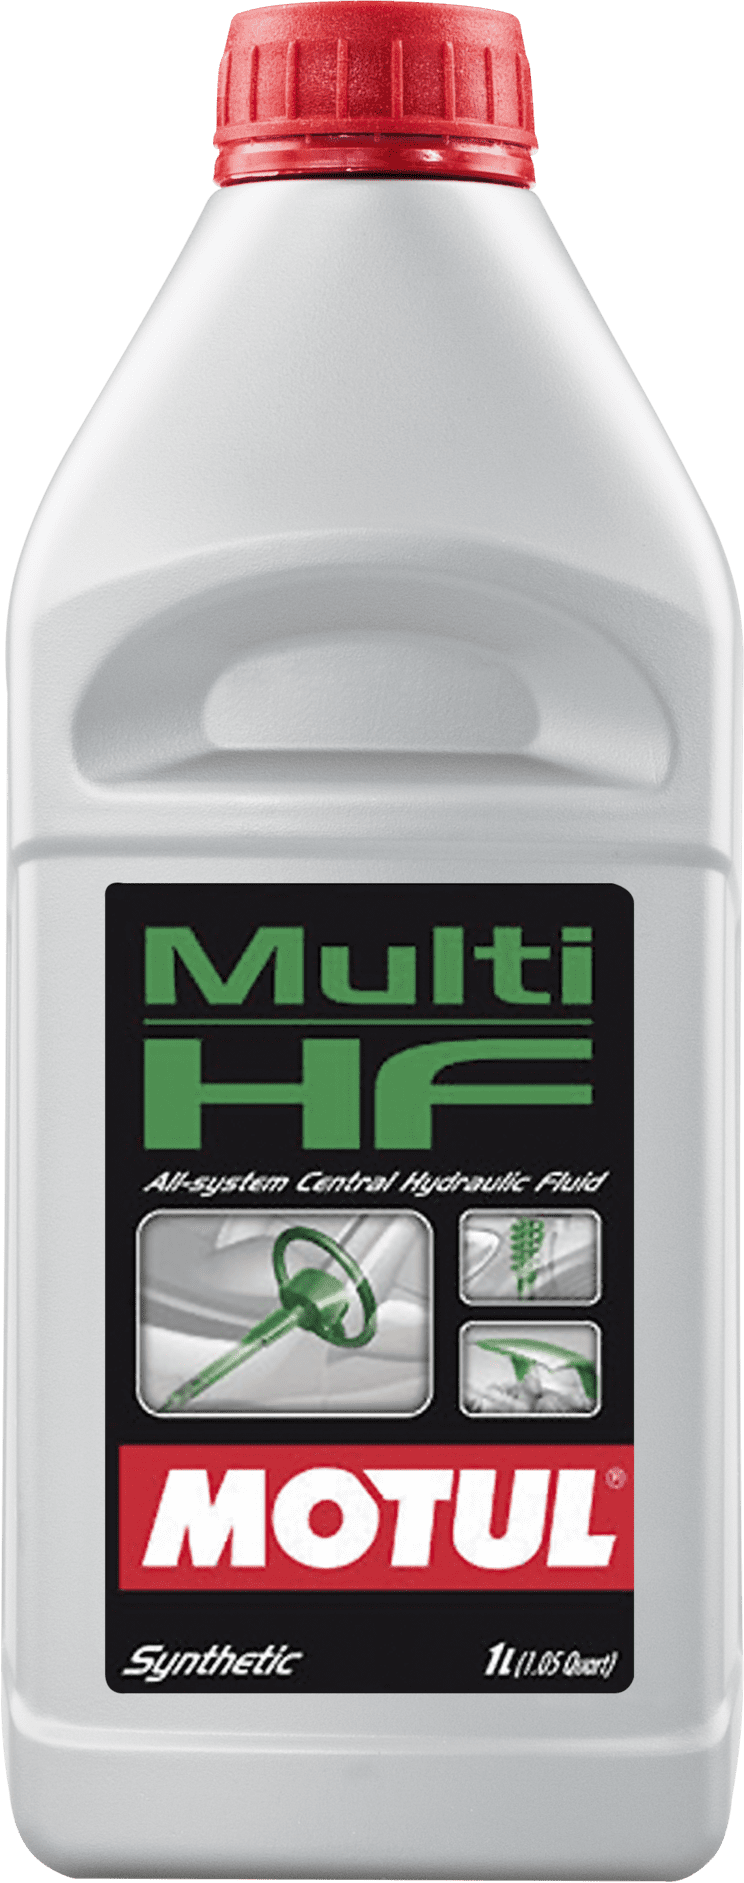 106399-1 MOTUL Multi HF is an advanced synthetic formulation for use in steering, suspension and other hydraulic systems requiring such products.